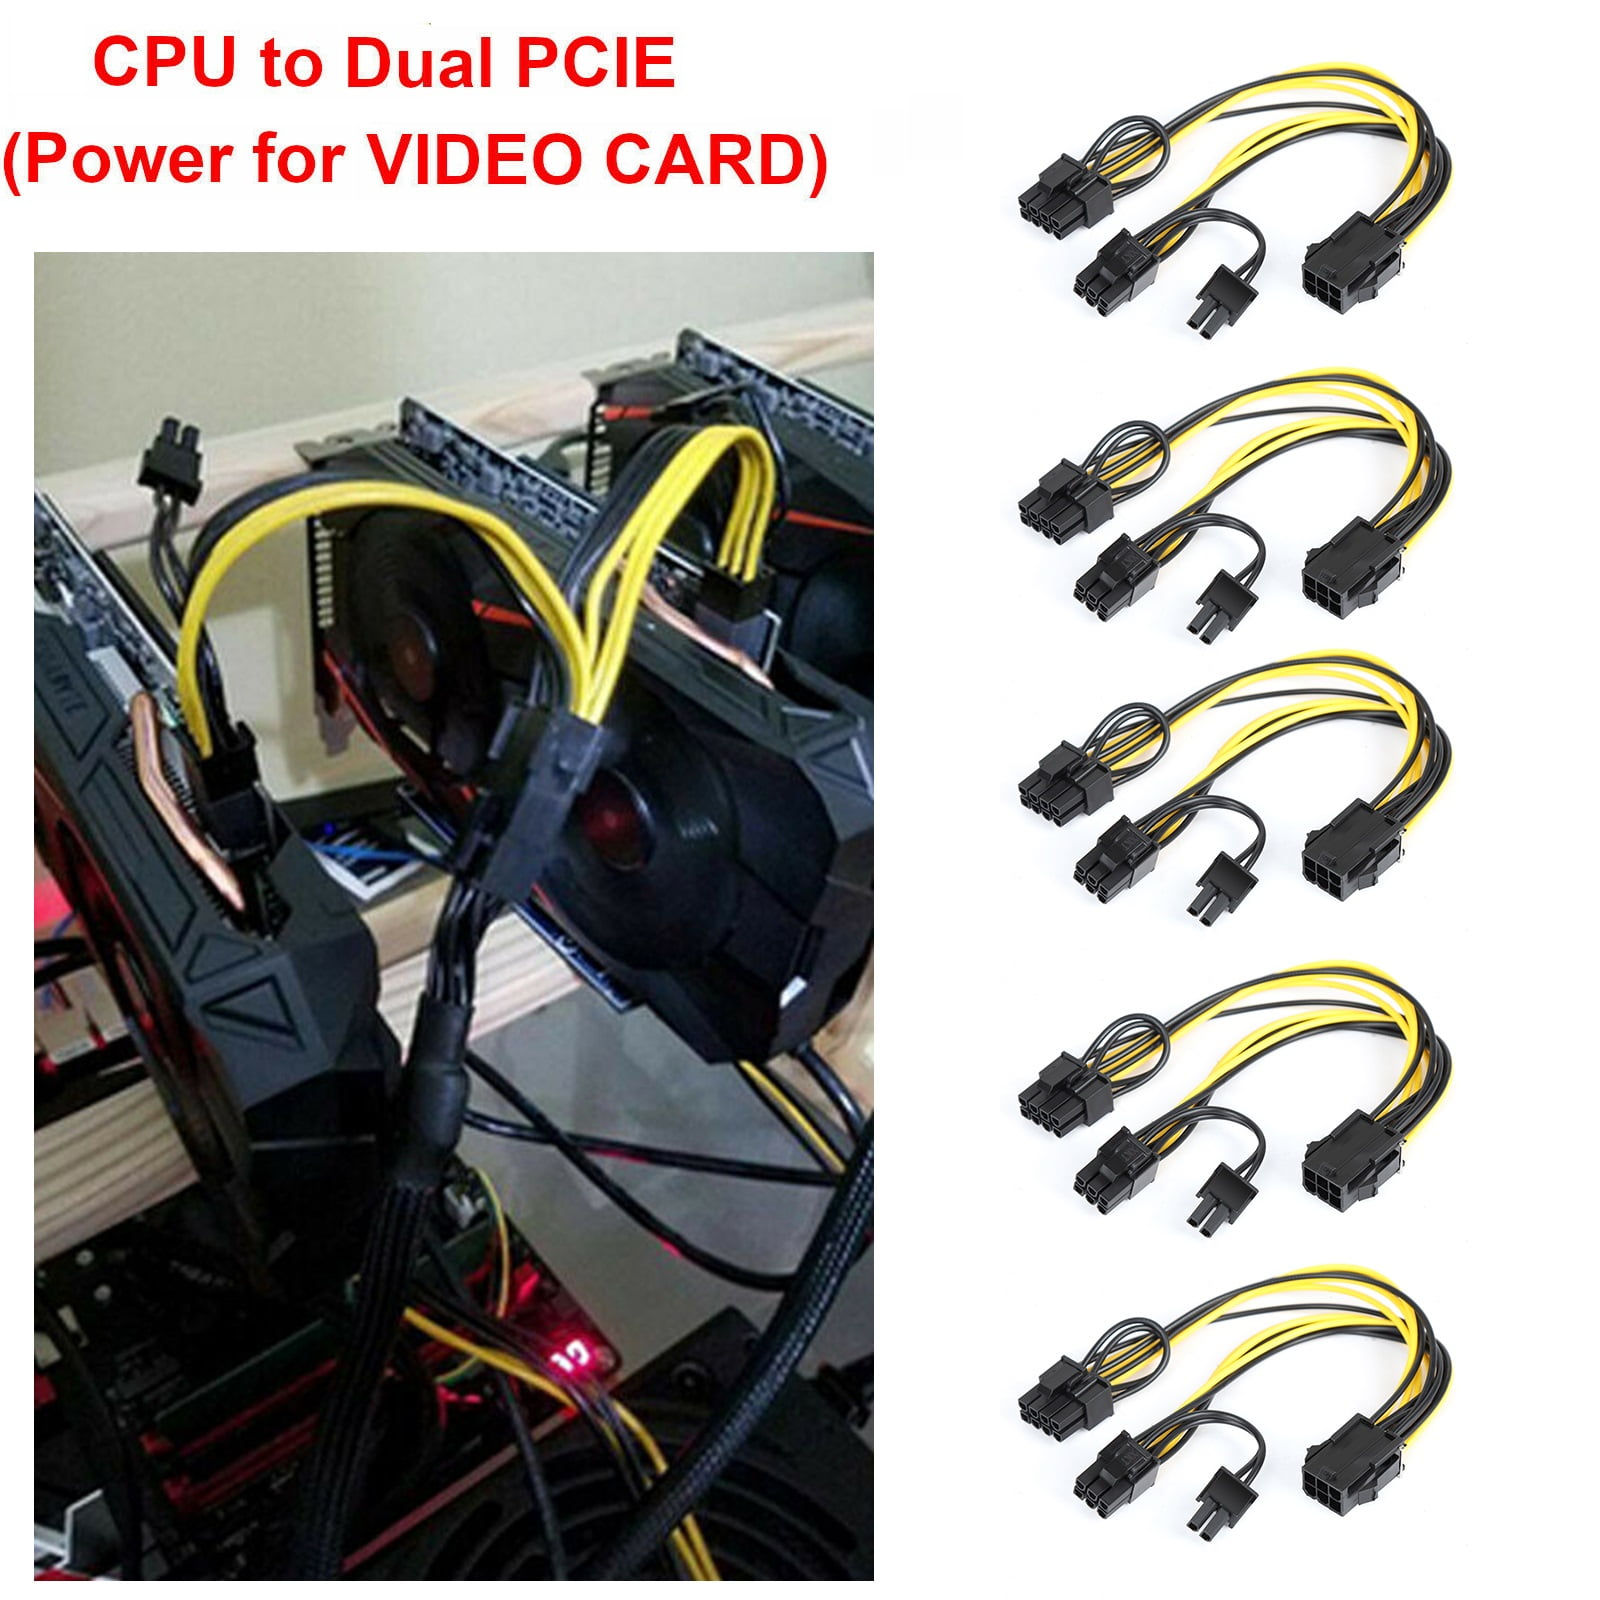 Connect the pcie power cable